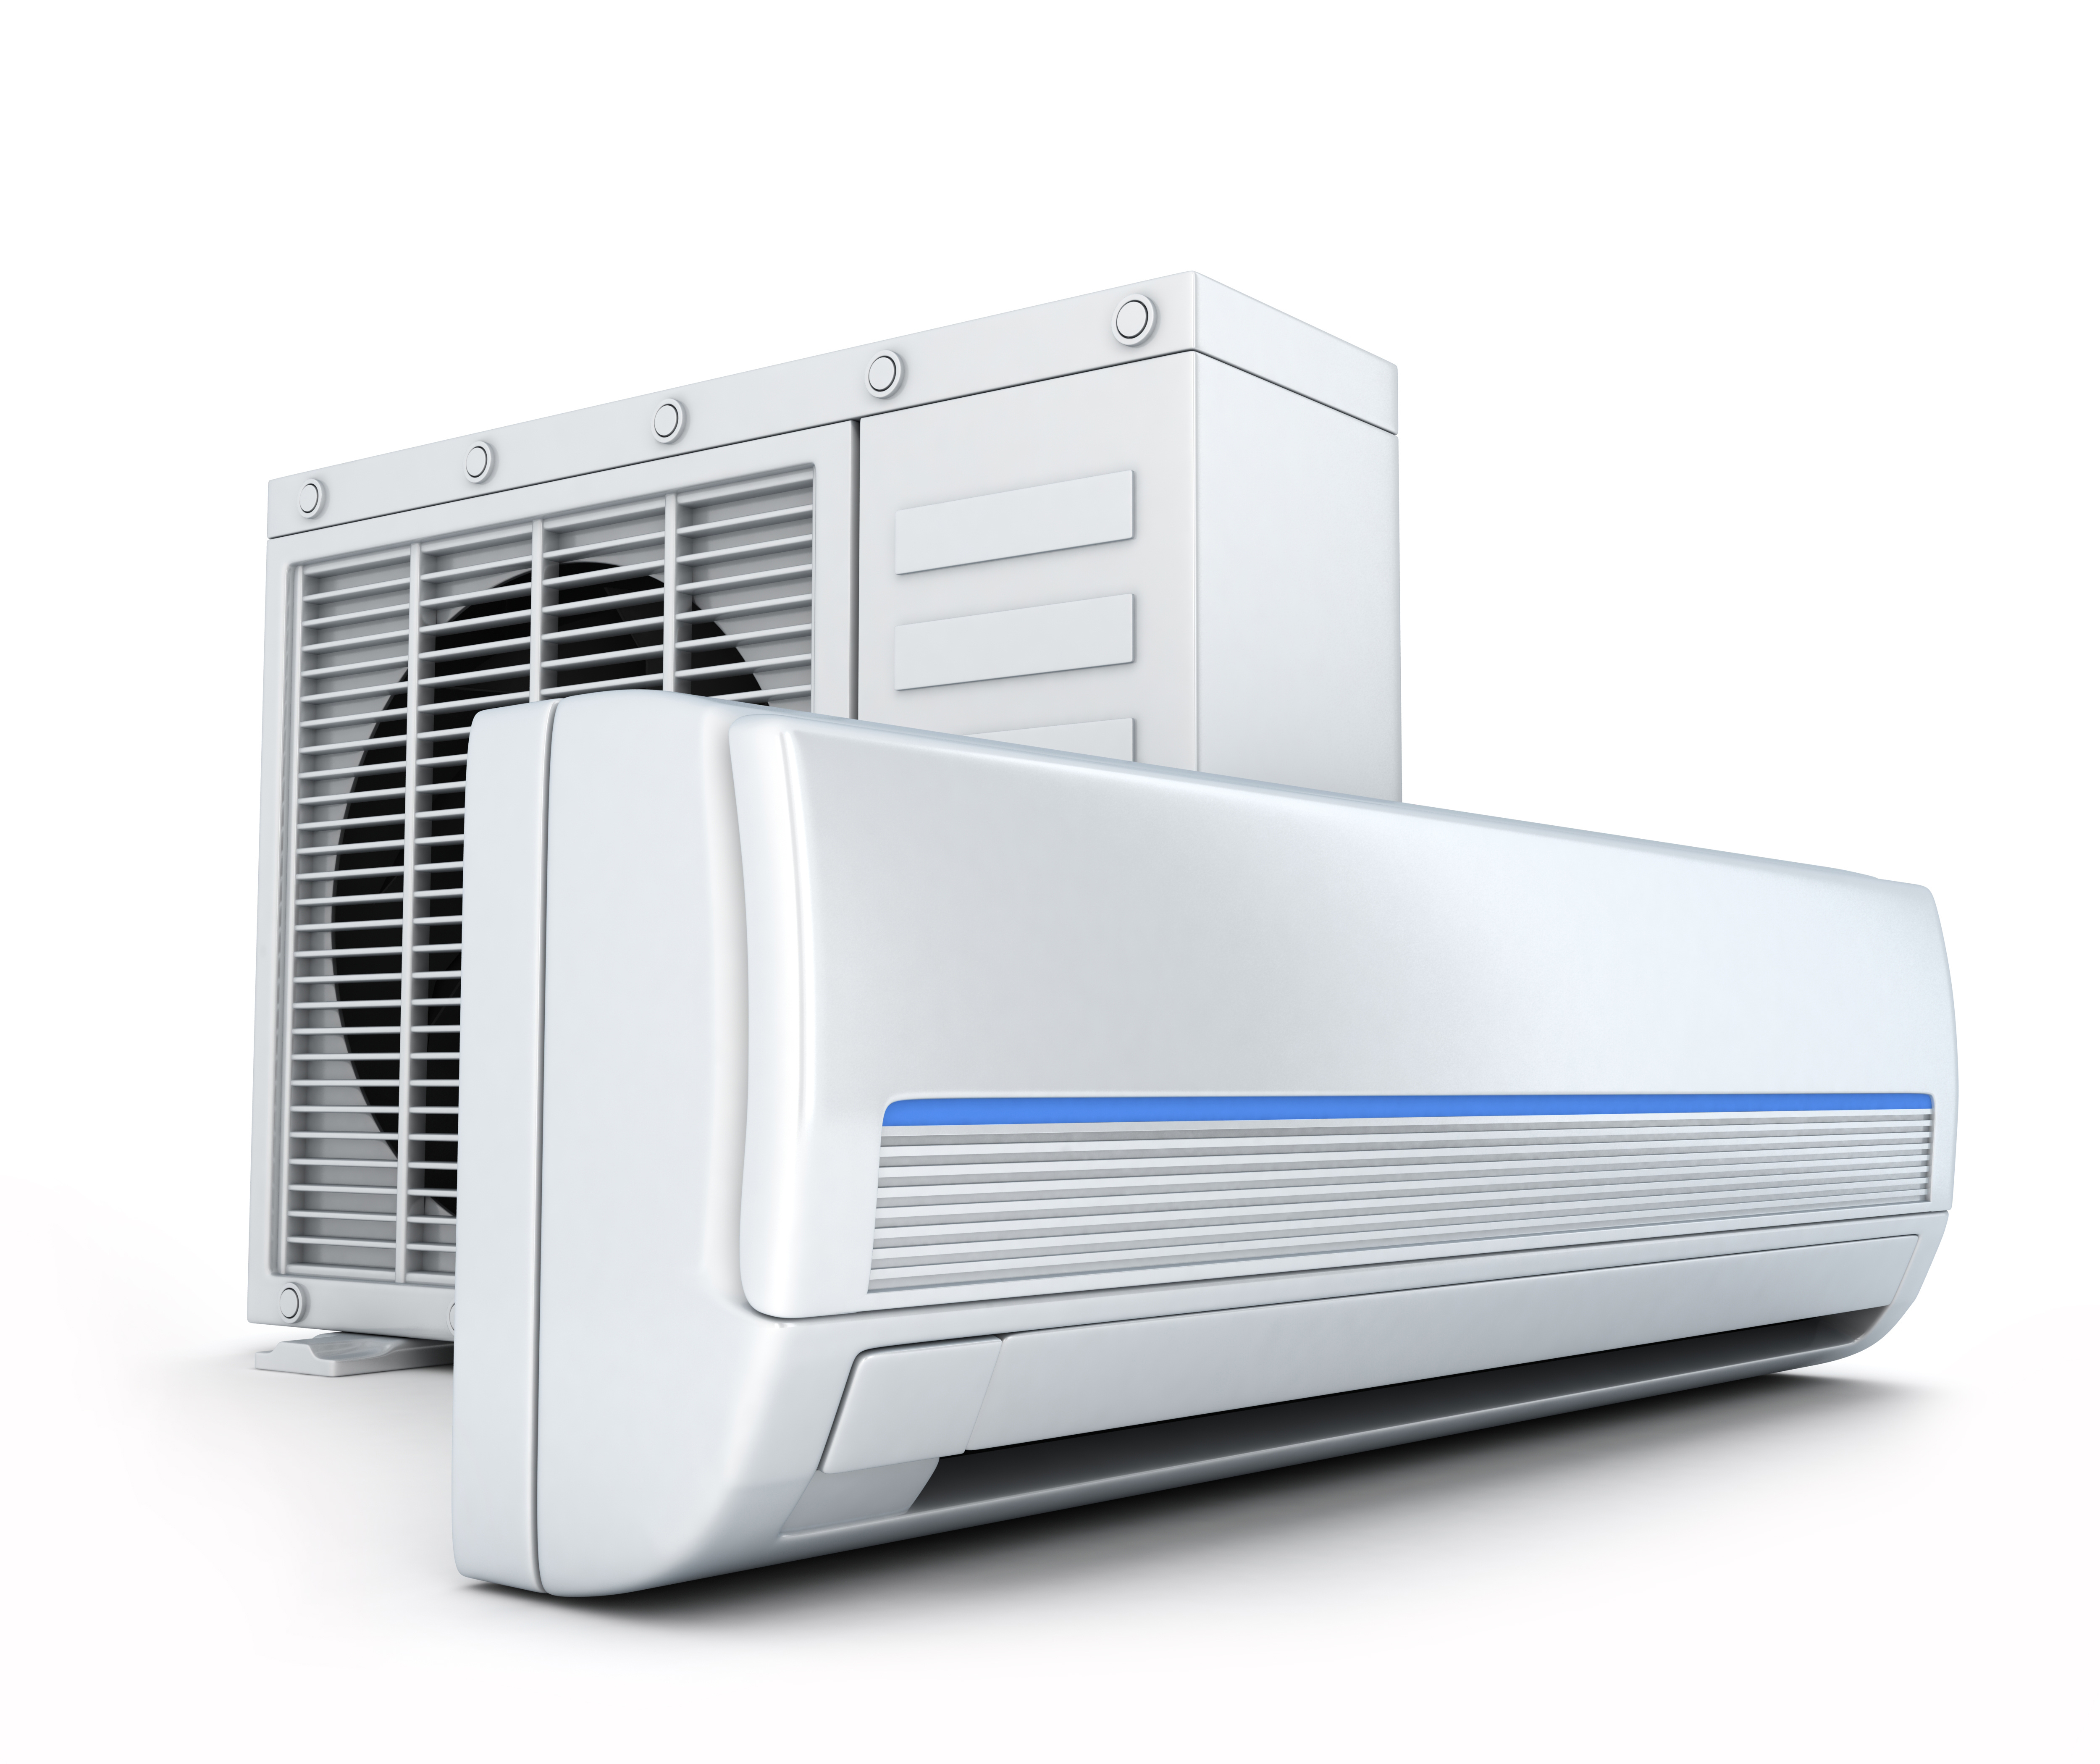 Beat The Heat Which Air Conditioner Is For You? Moxie Foxtrot